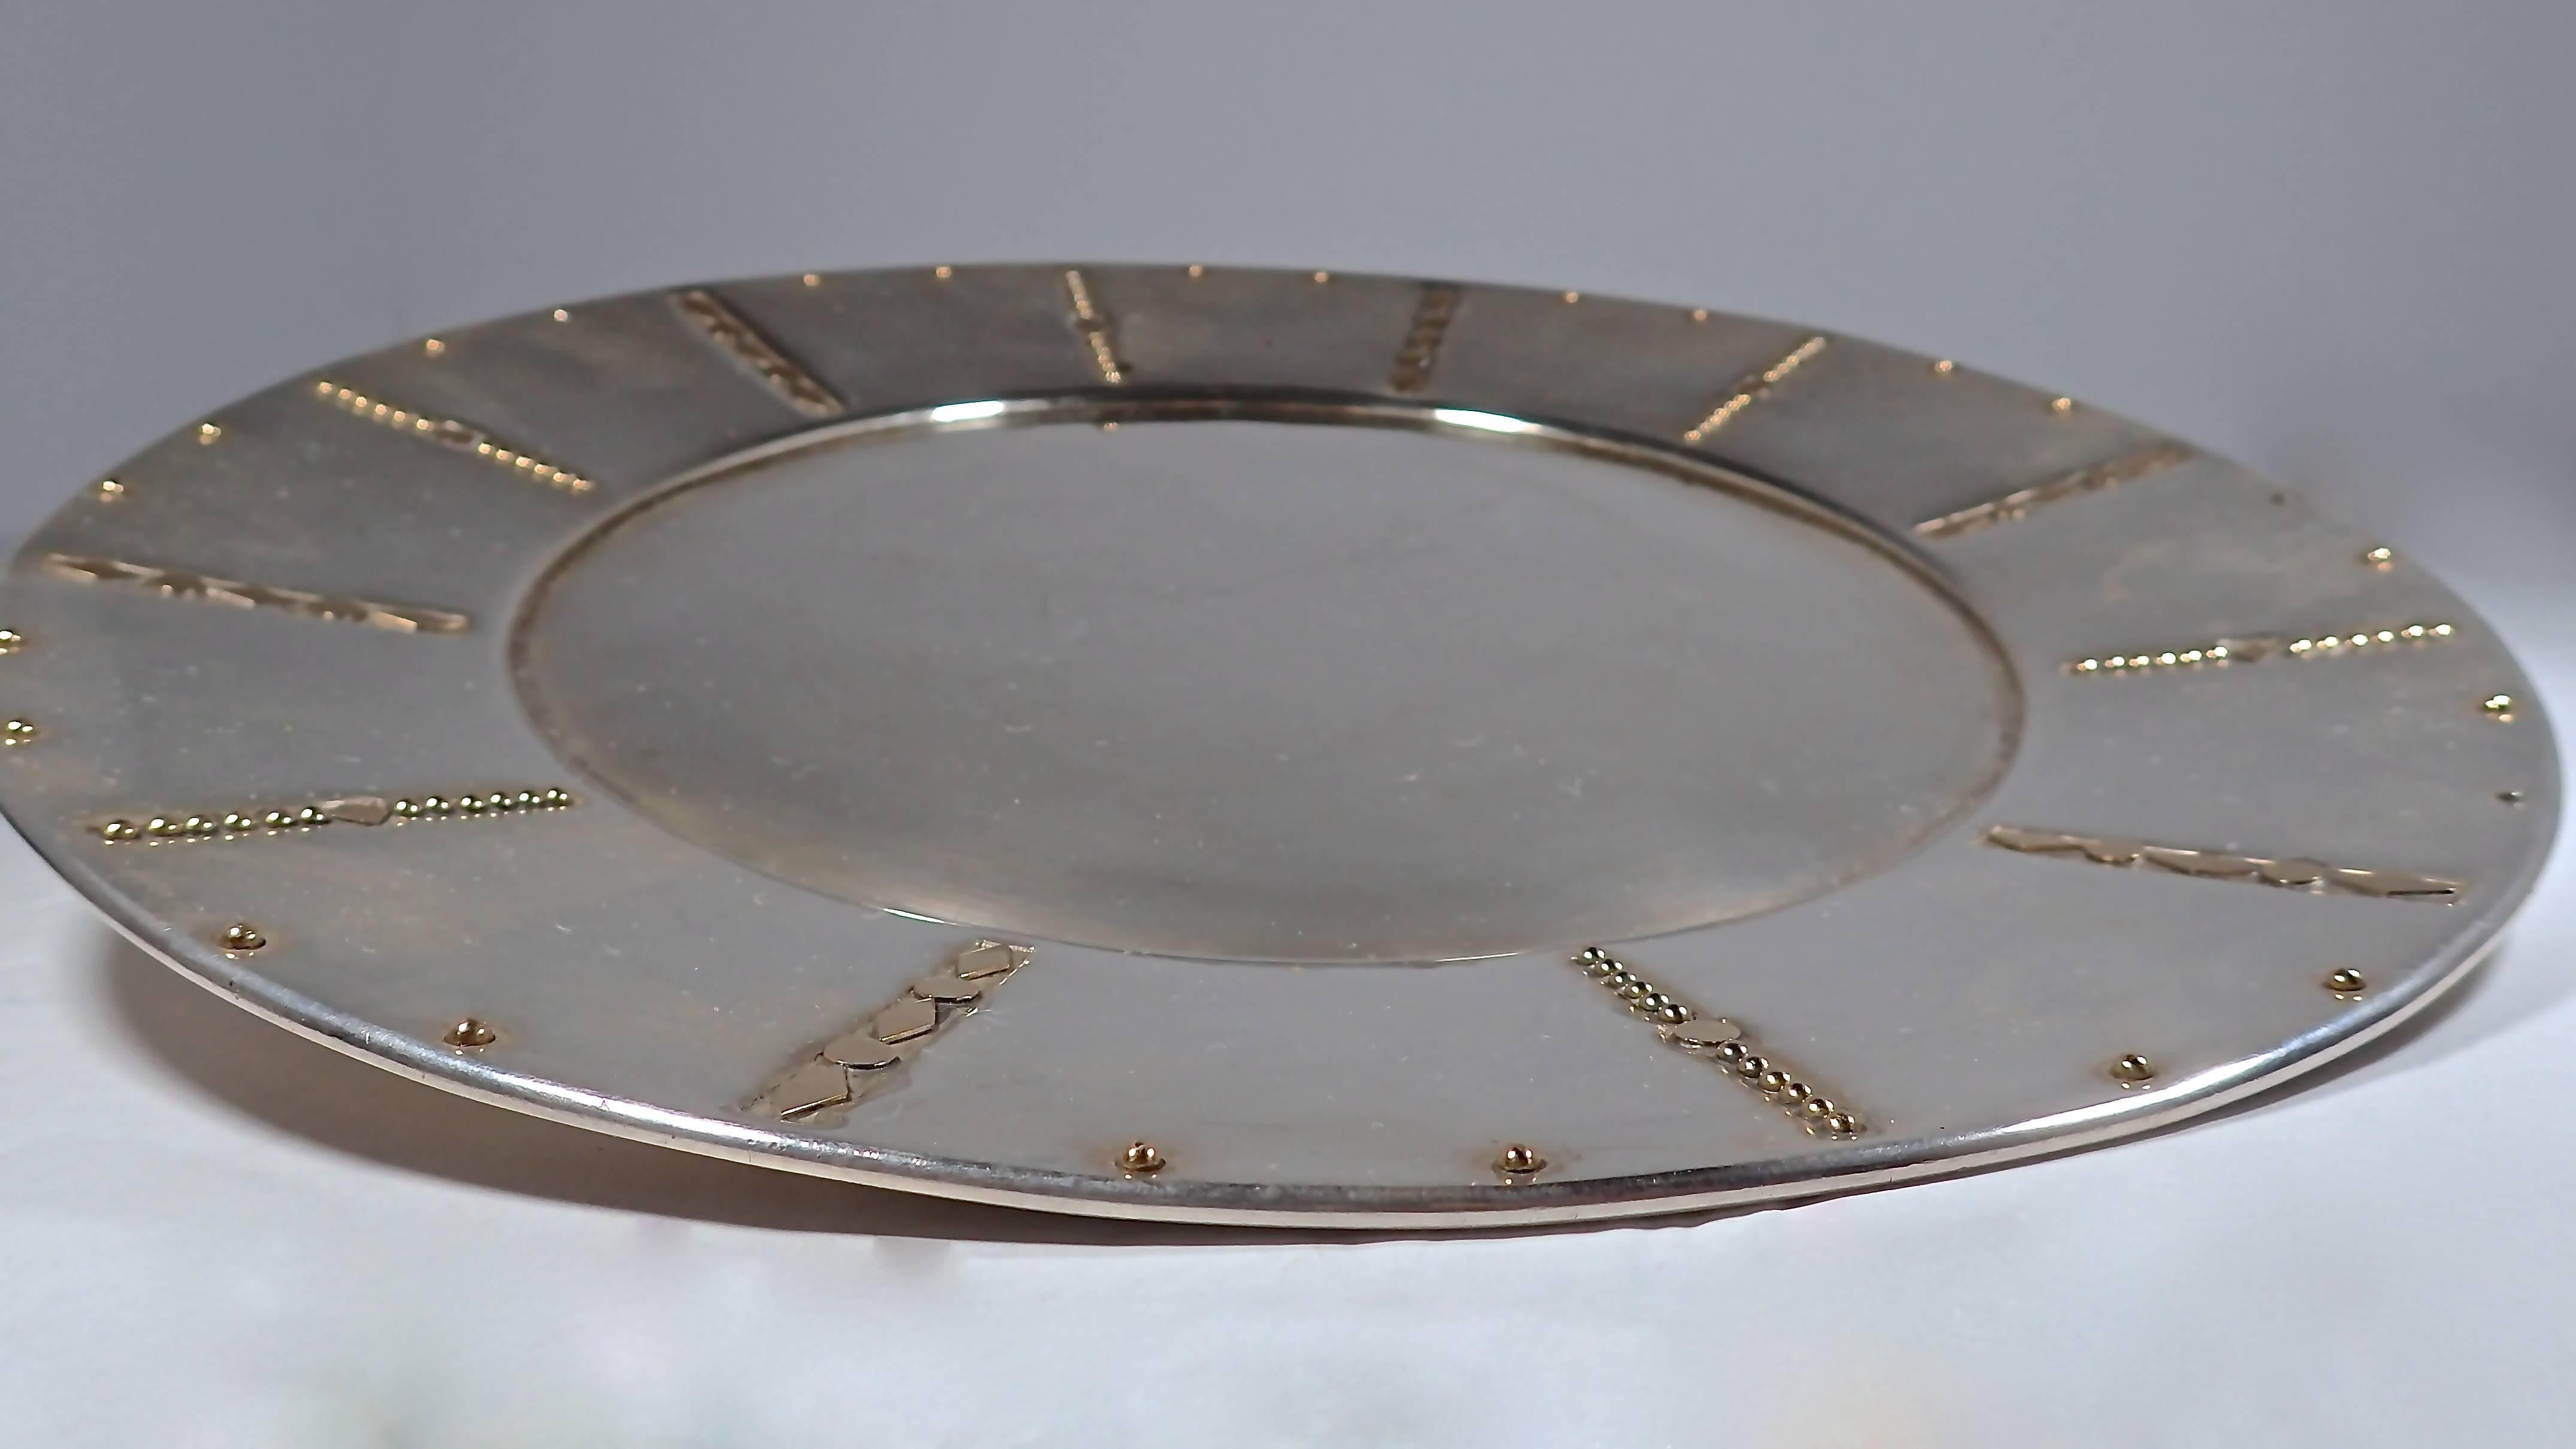 Simple sterling silver plate with inlayed brass details in and along the border. Stamped with Spratling's silver mark: Eagle with 30 (for authenticity).  